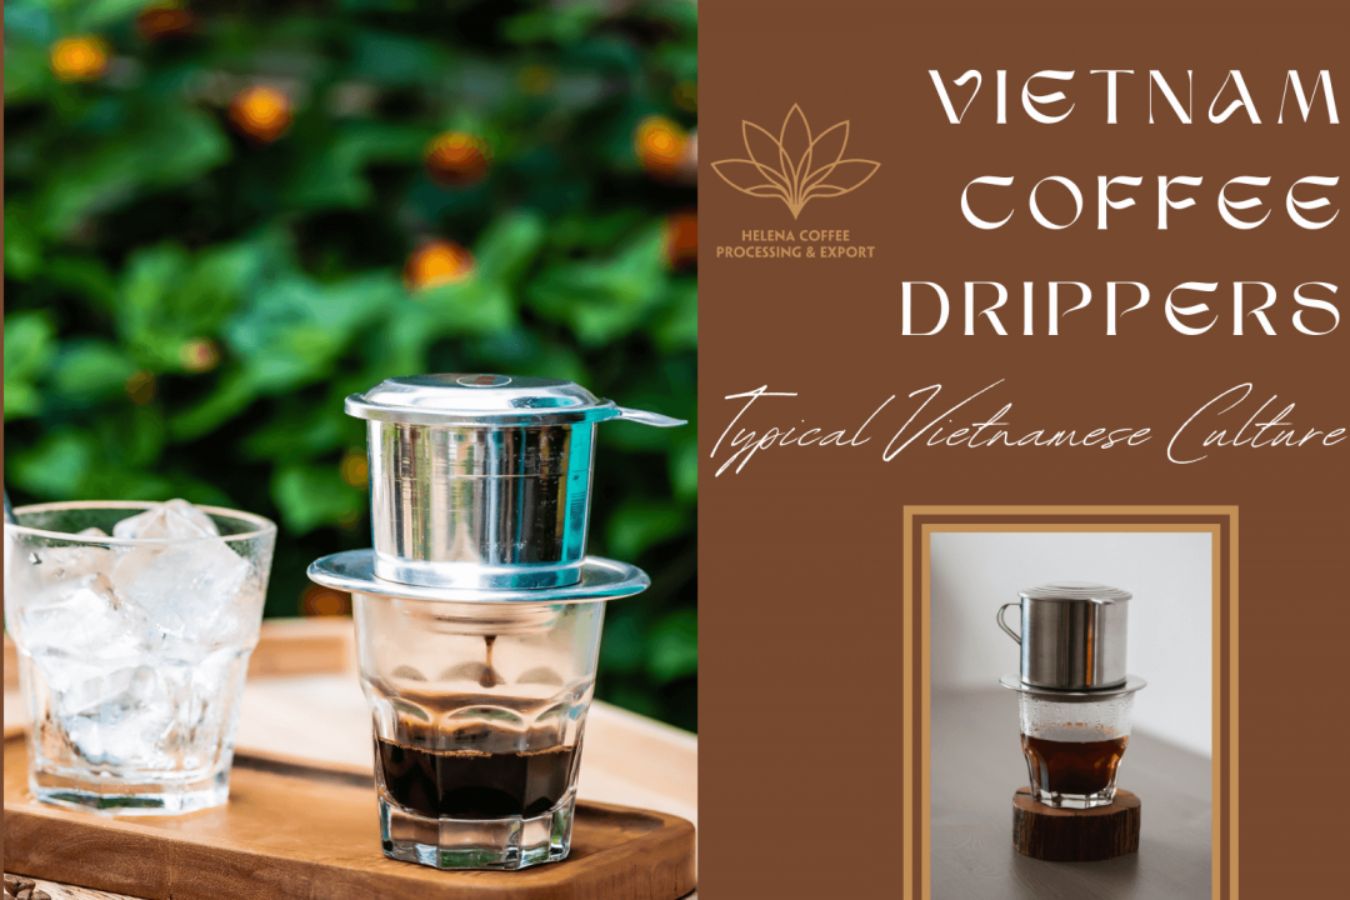 Vietnam Coffee Drippers Typical Vietnamese Culture